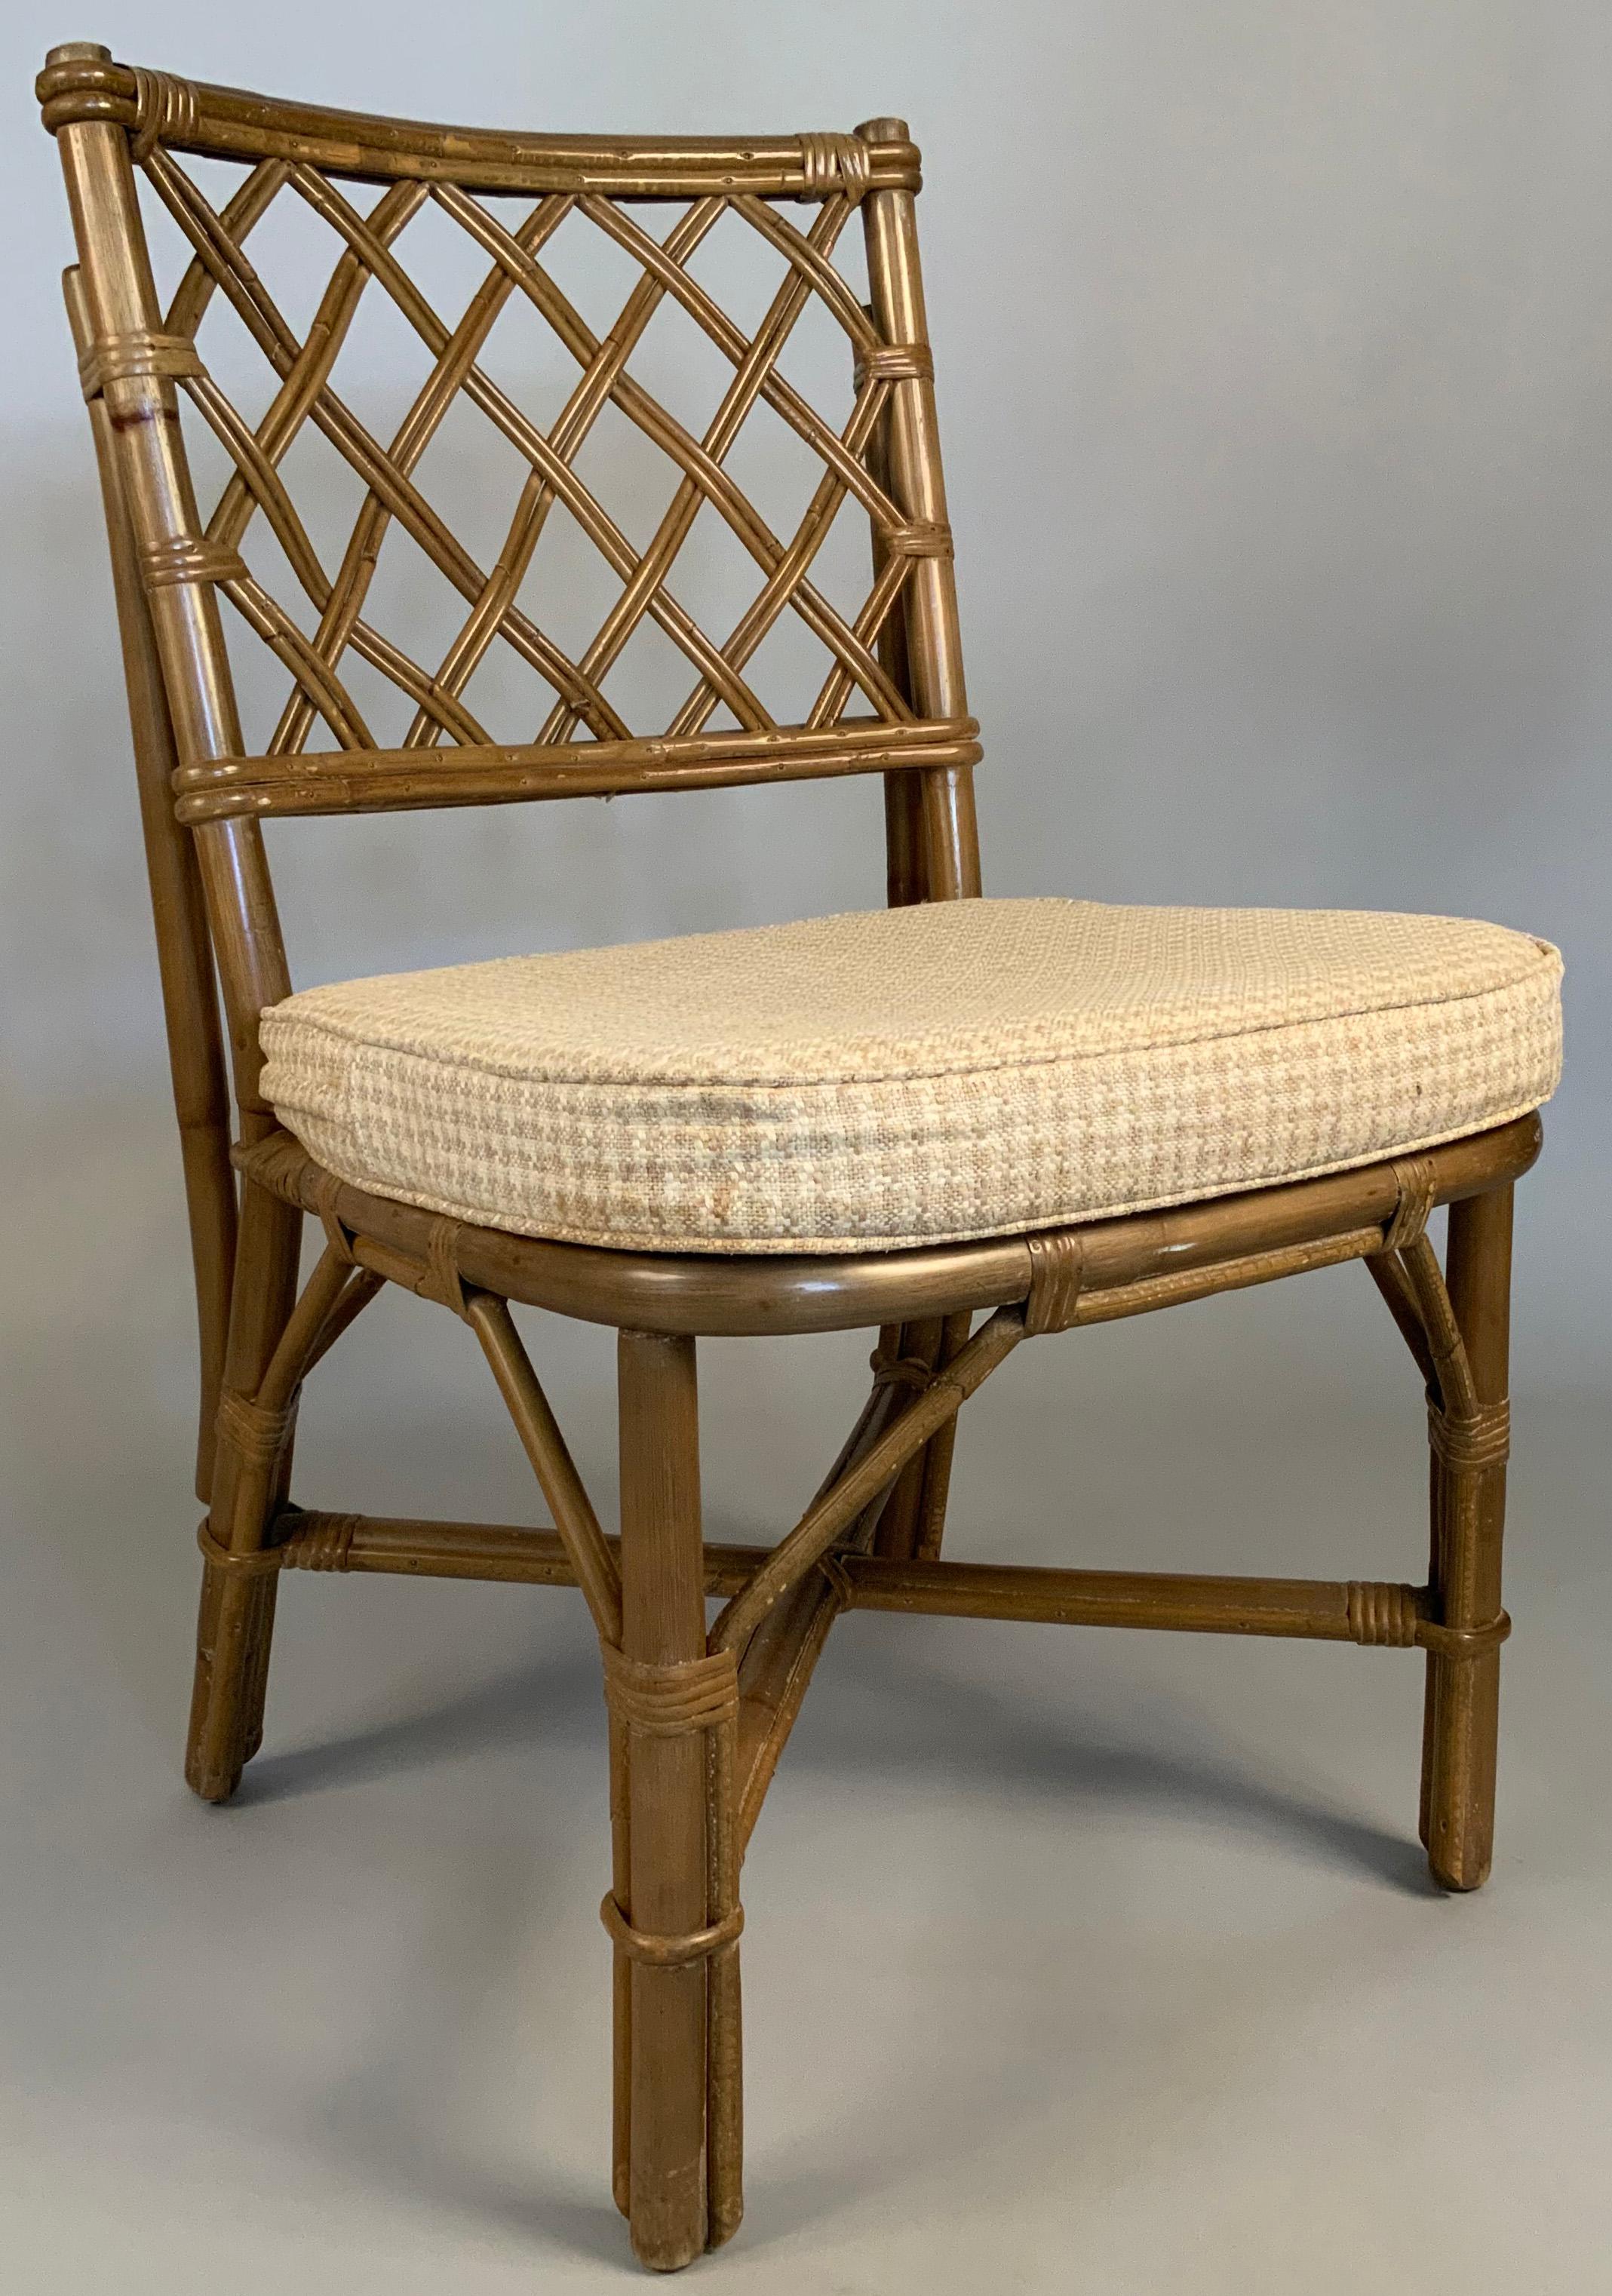 a very nice set of eight vintage 1960's rattan dining chairs by Ficks Reed, nice design and proportions, with lattice backs and reeded seats, in their original finish of beige with a hint of light green. 

the cushions are included but the covers